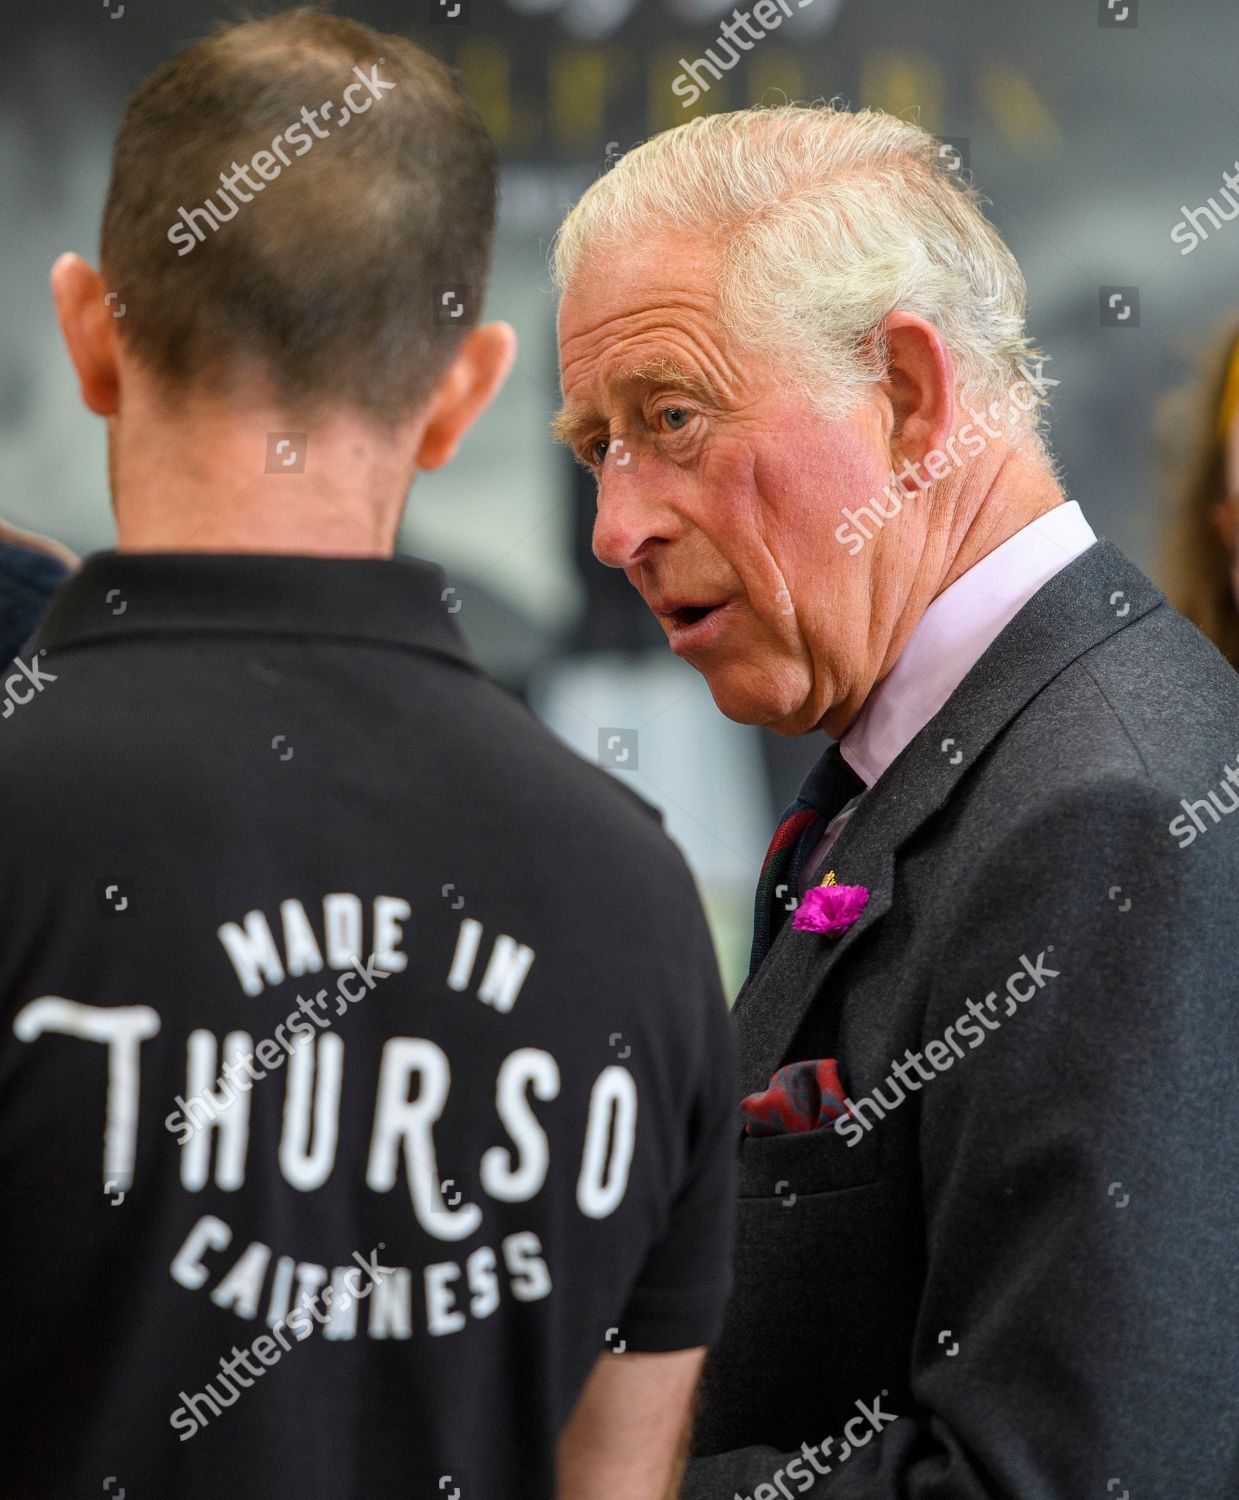 prince-charles-visits-caithness-scotland-uk-shutterstock-editorial-10349568by.jpg